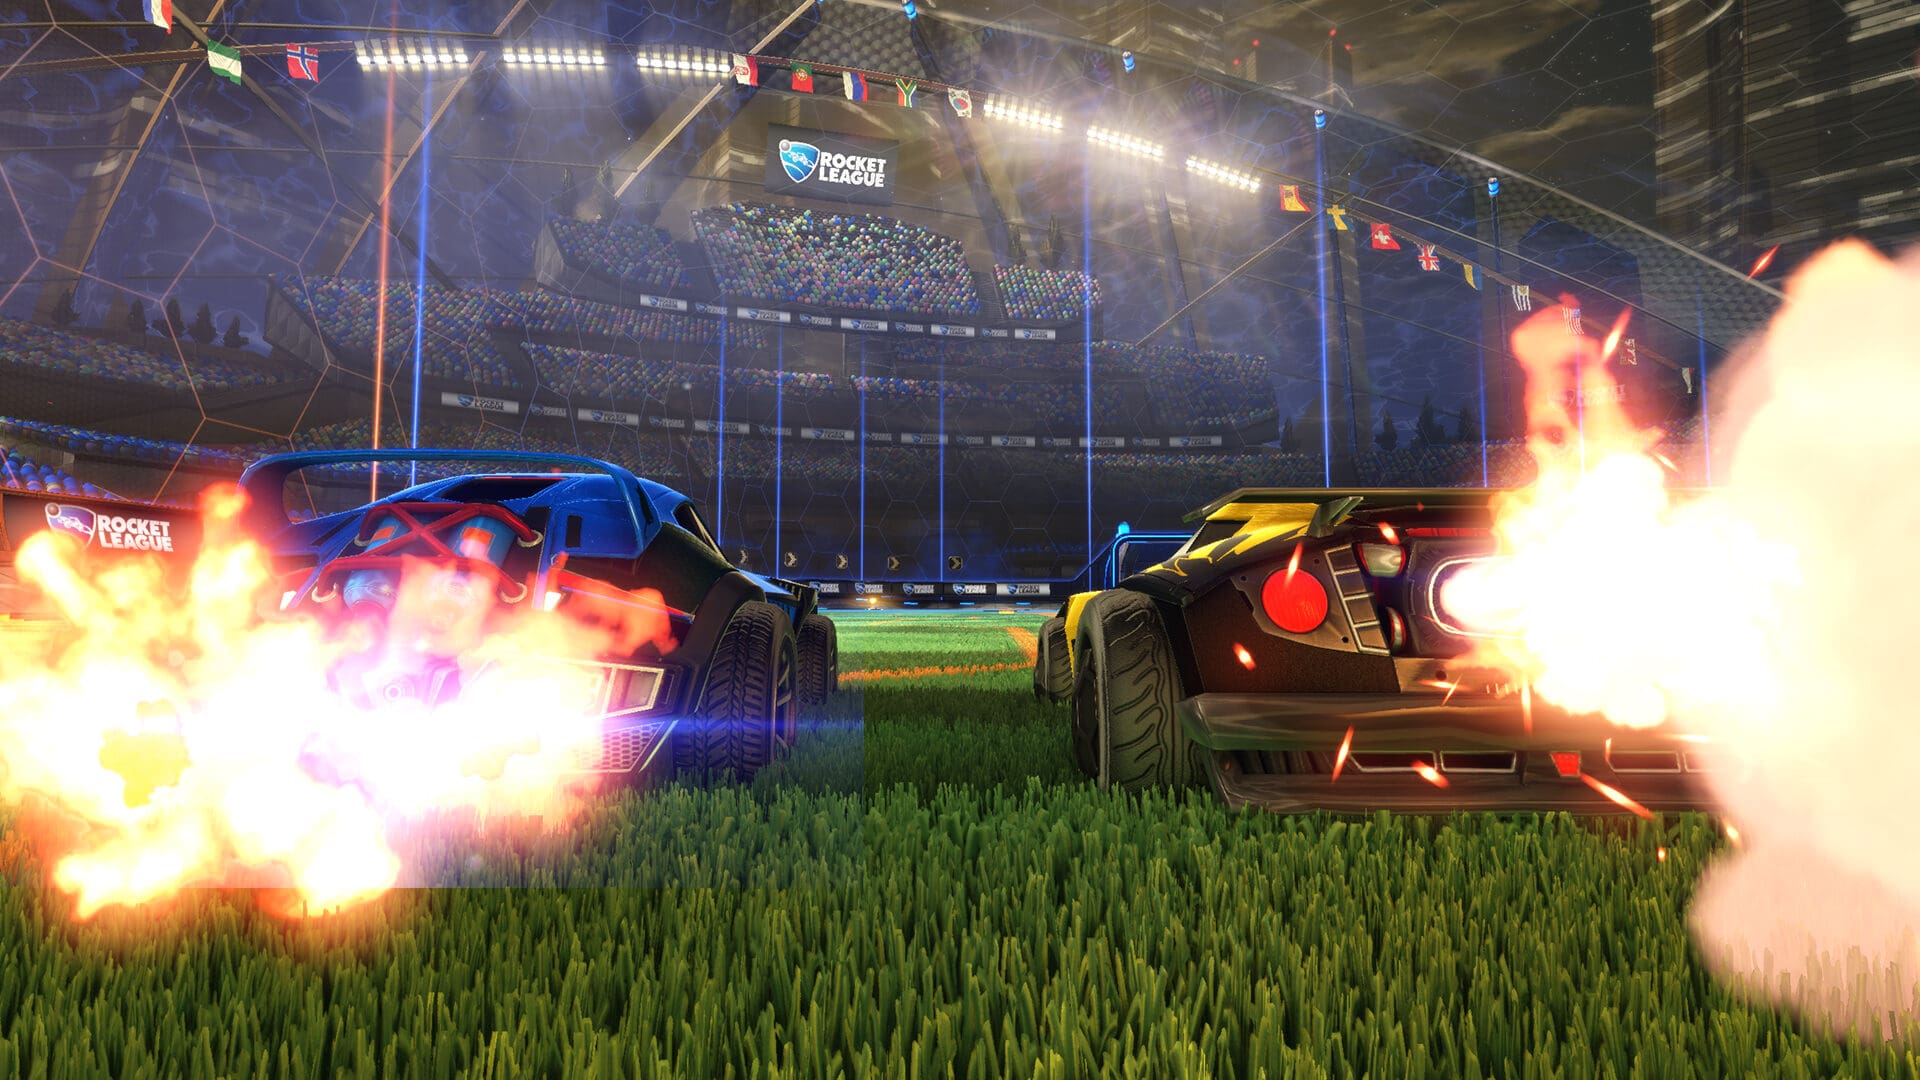 Rocket League: Collector’s Edition Release Date Announced